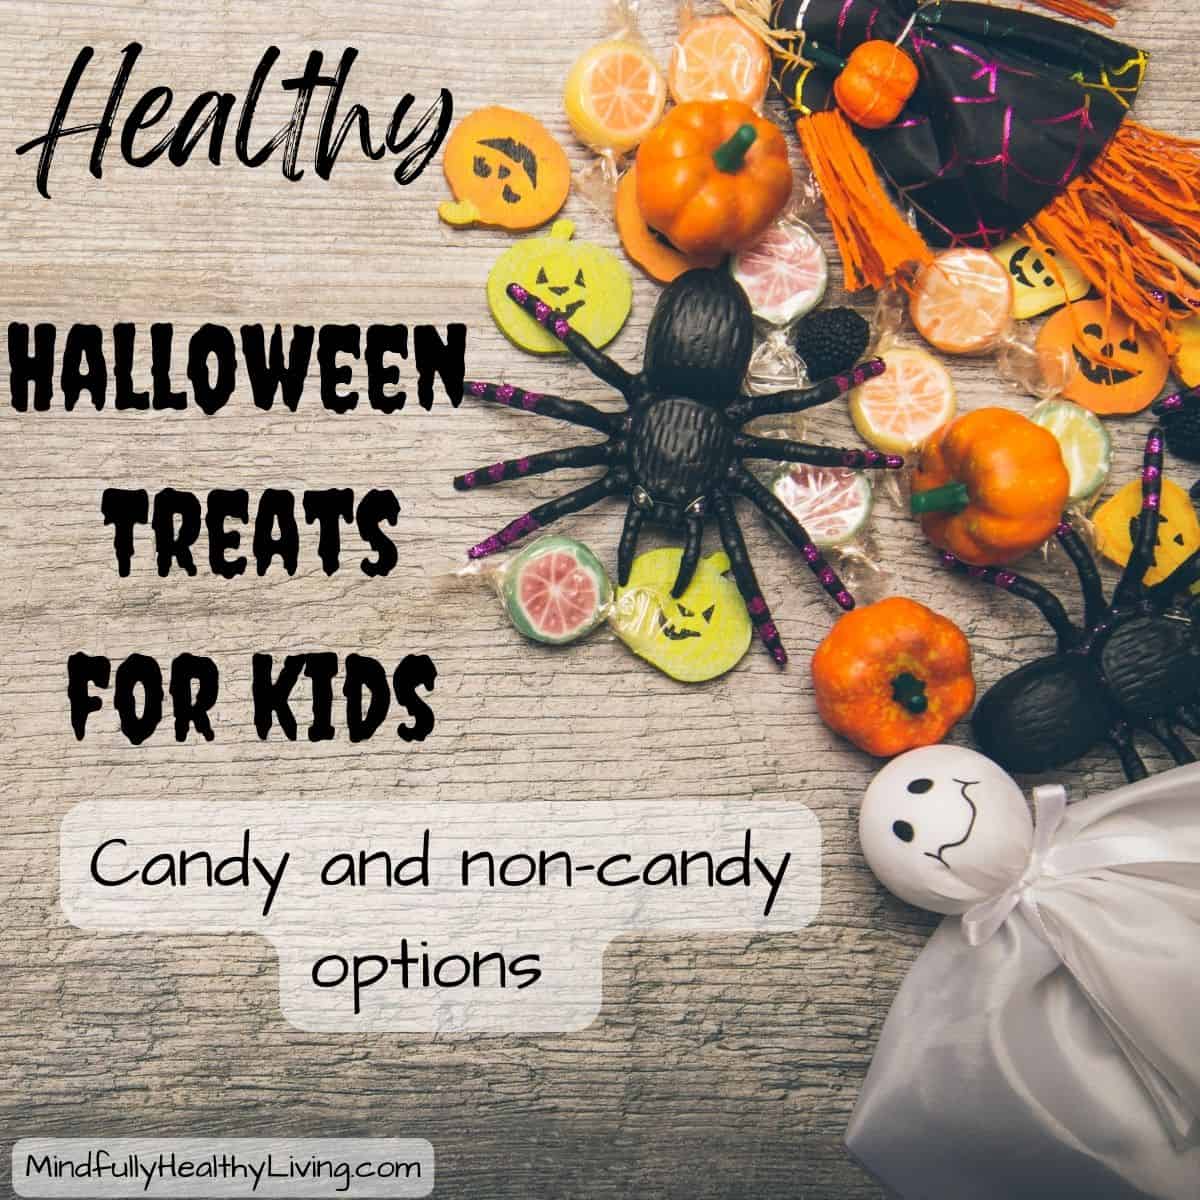 A wooden backdrop with Halloween decorations on the side like a ghost, pumpkin, spider, candies, and pumpkin cutouts. In the middle is spooky text that says healthy Halloween treats for kids candy and non-candy options mindfullyhealthyliving.com